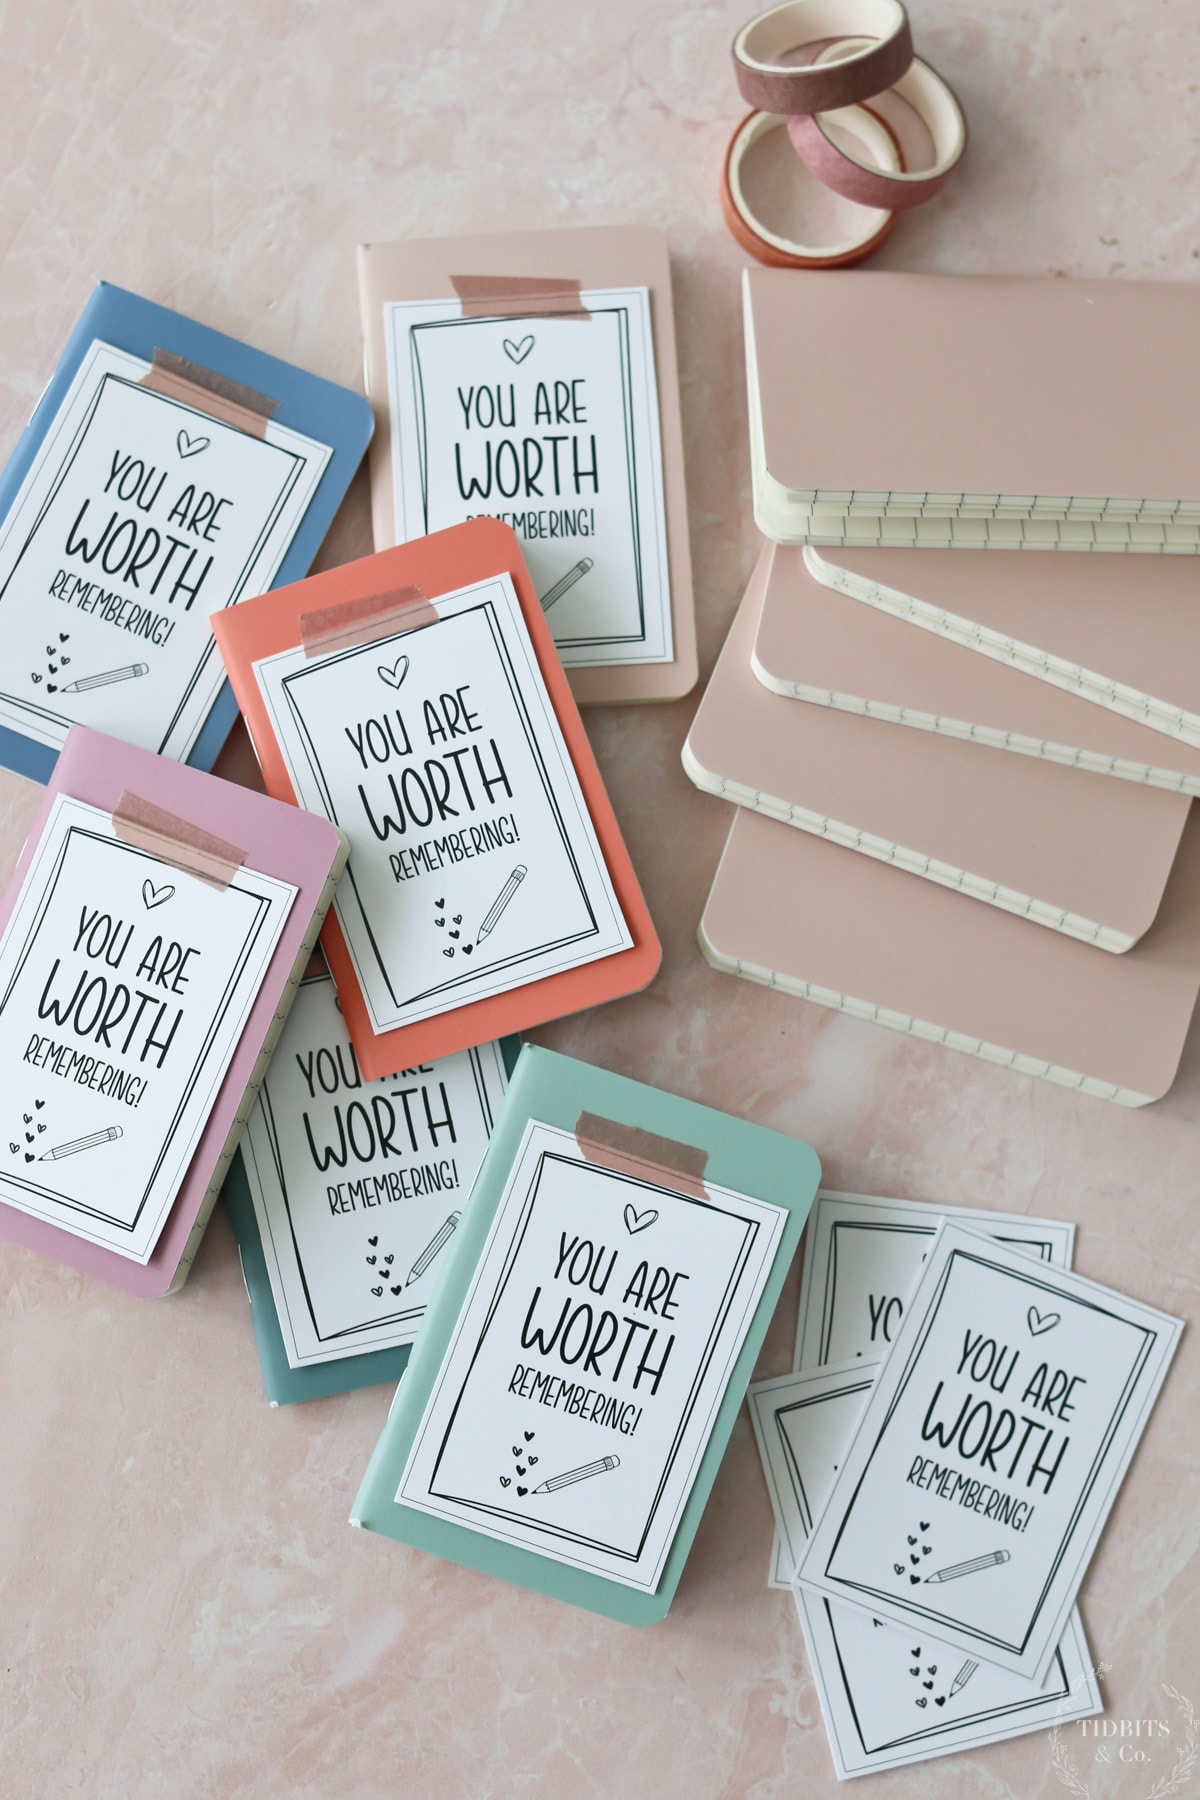 "You are worth remembering" valentines with free printable cards